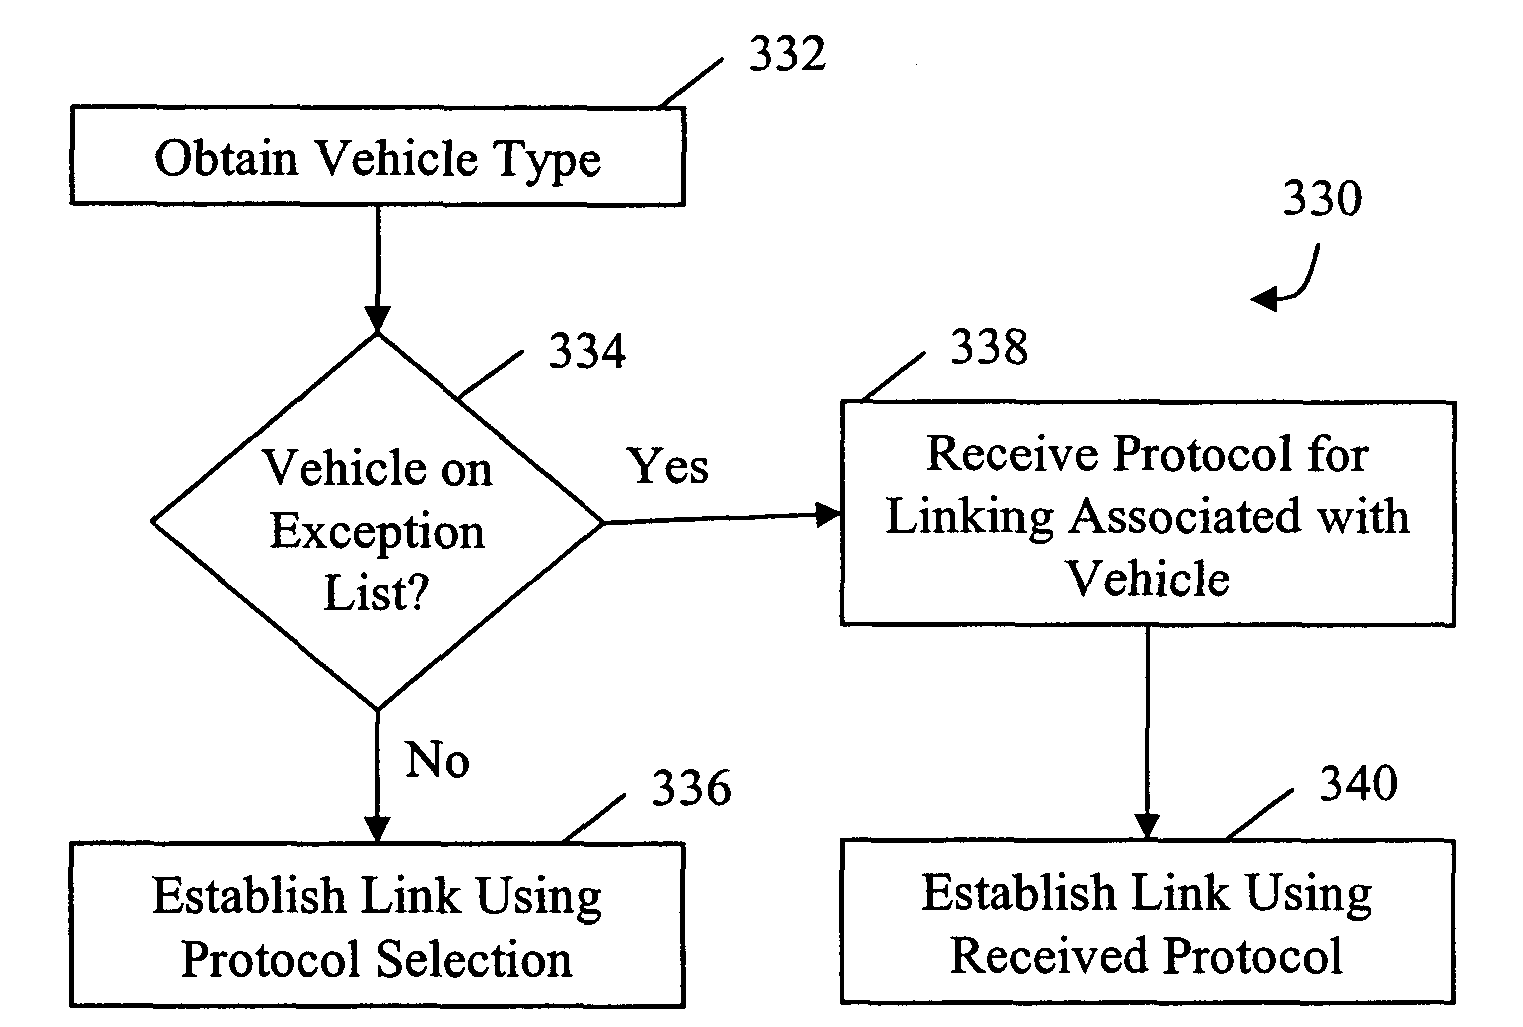 Method and system for retrieving diagnostic information from a vehicle